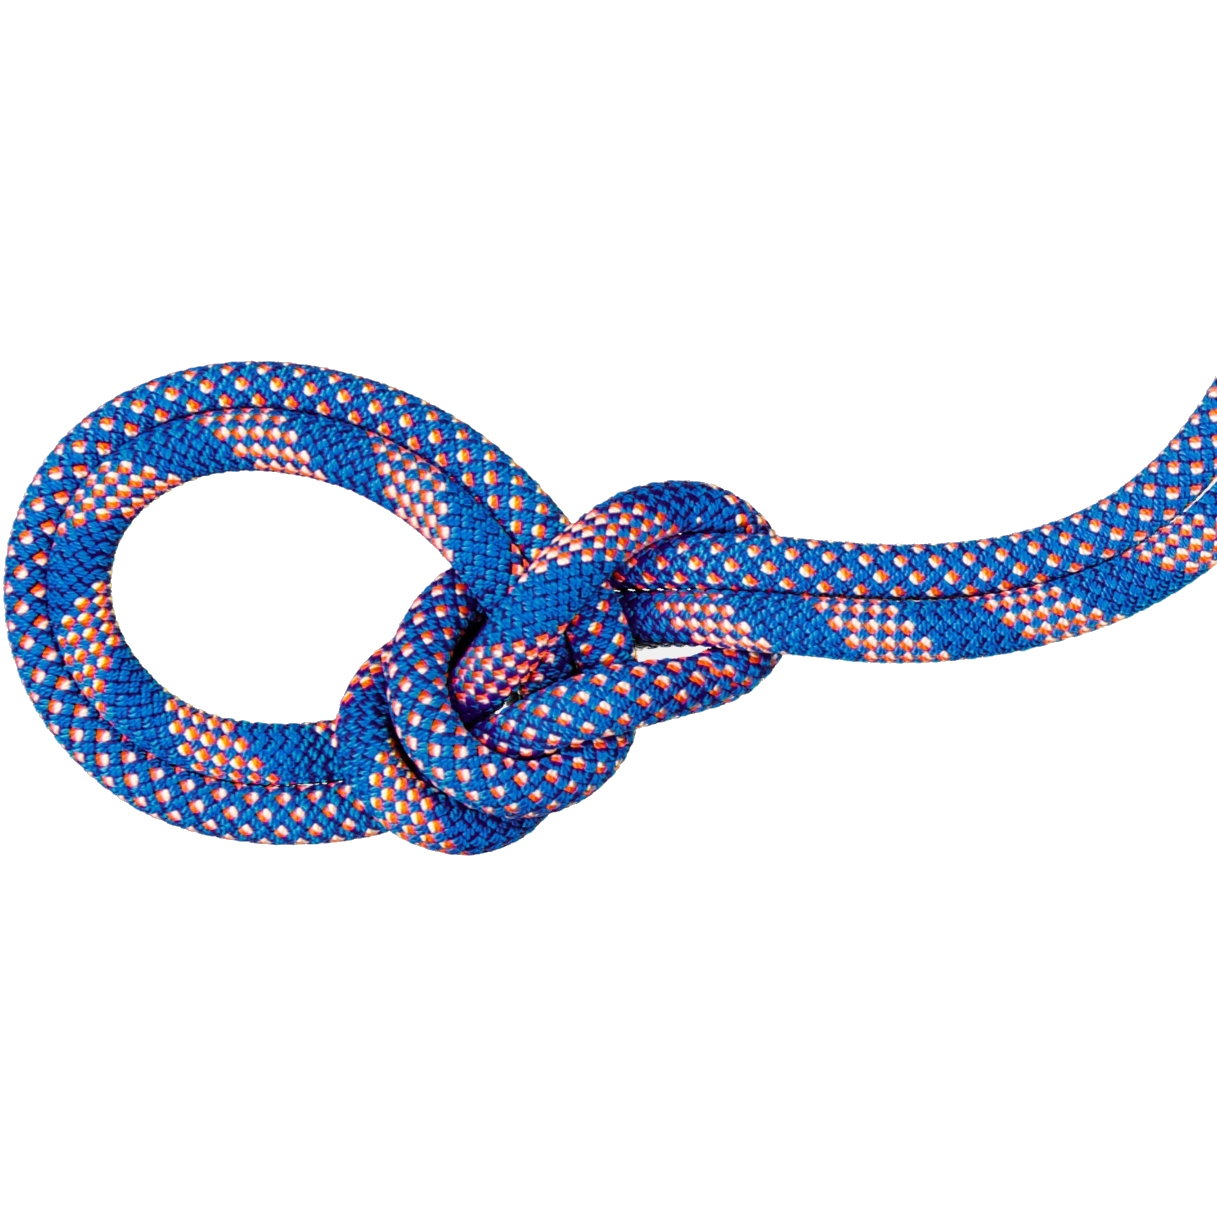 Picture of Mammut 9.5 Crag Classic Rope - 60m - duodess - carribean blue-white